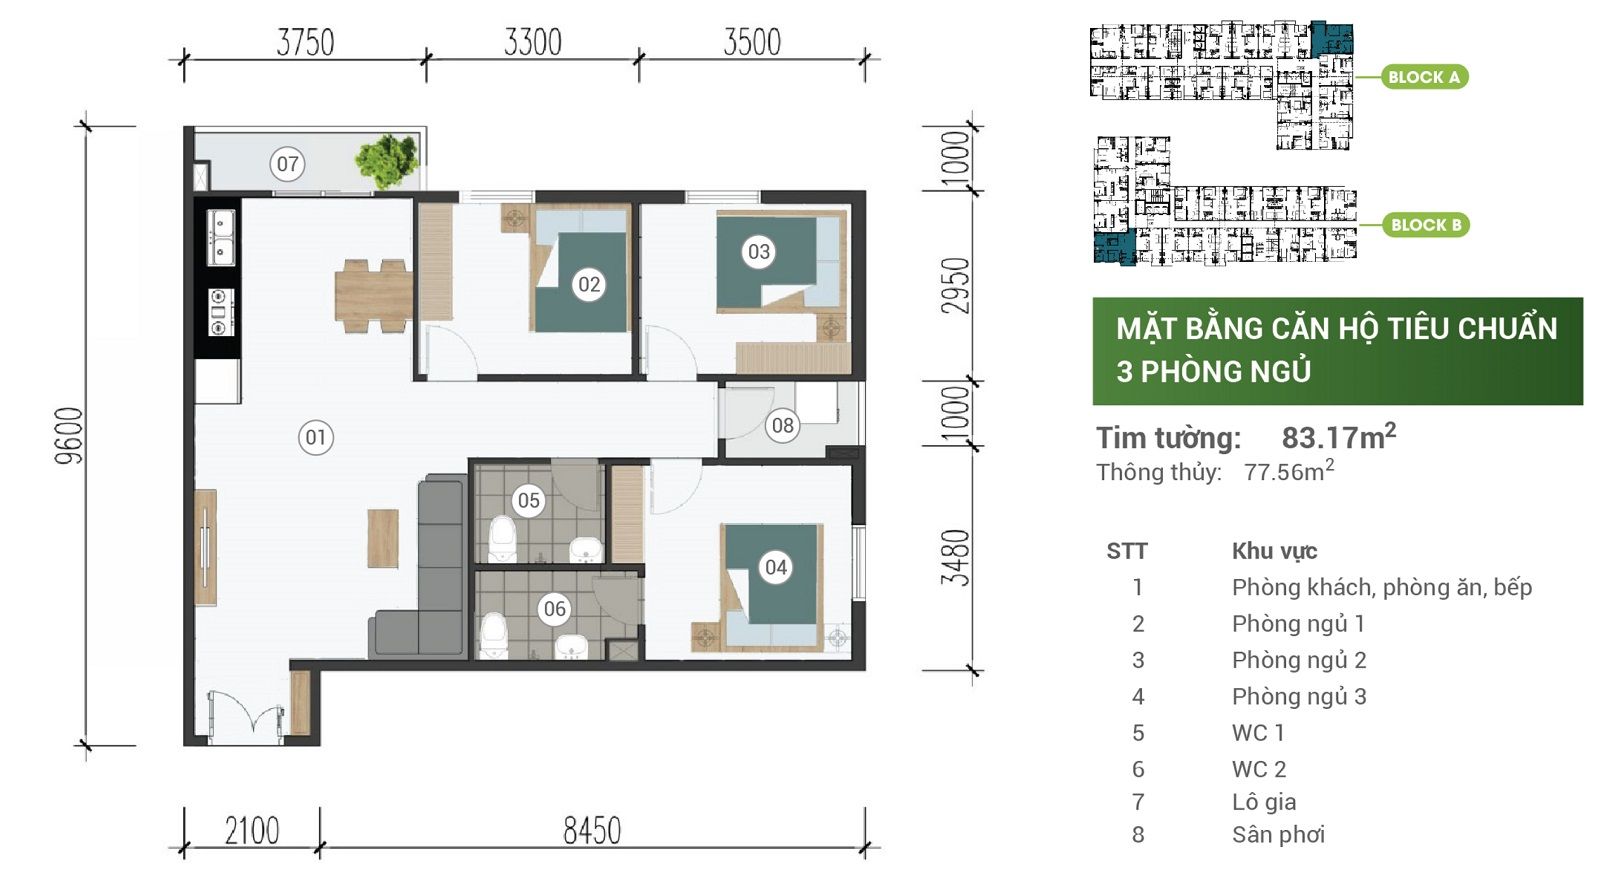 Park View Binh Duong 3-bedroom apartment layout